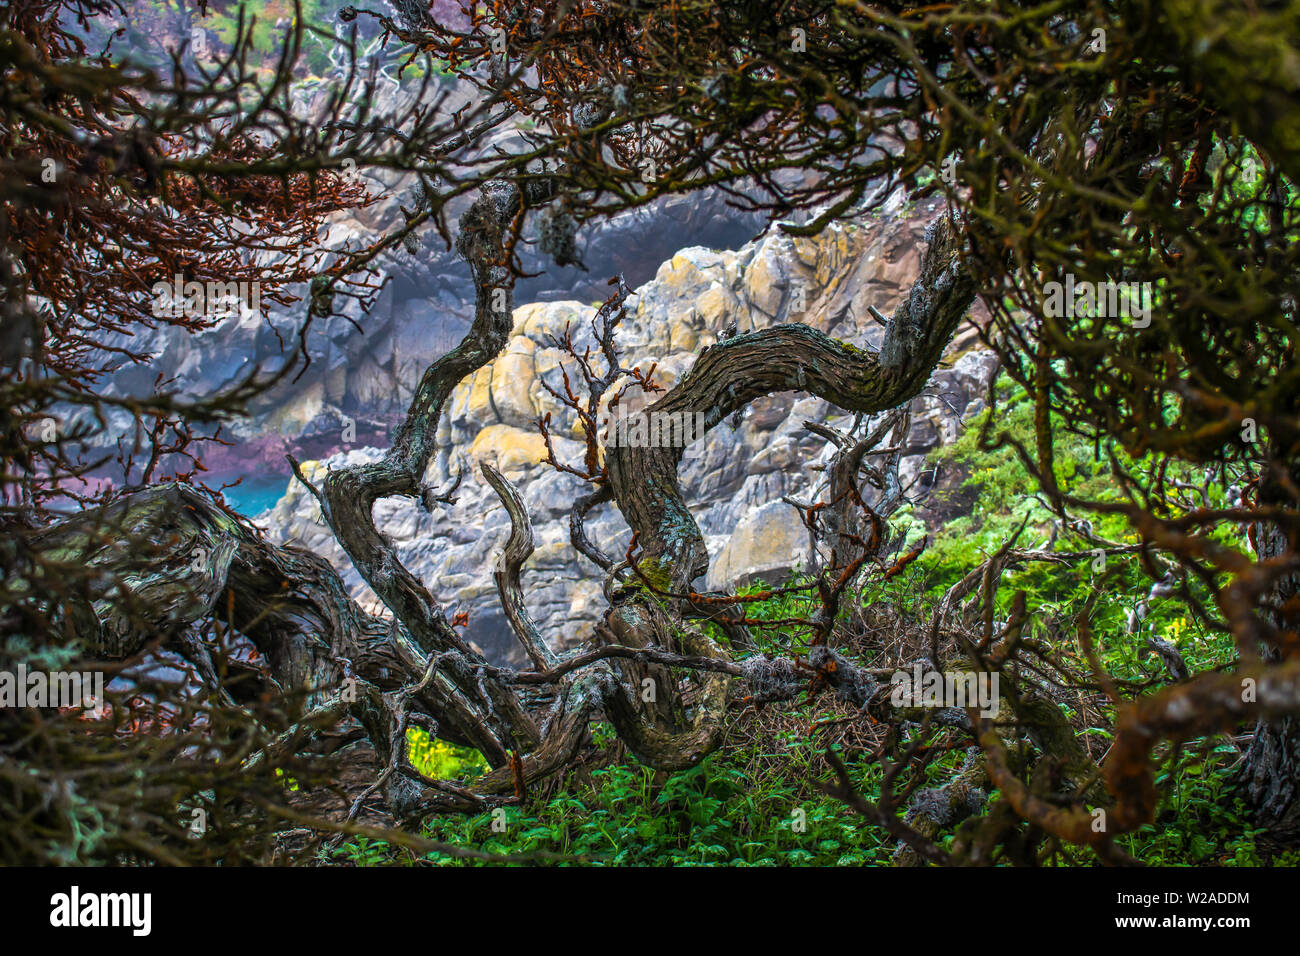 Twisted bark from Cypress trees in colorful scene with rocks foliage and ocean. Stock Photo